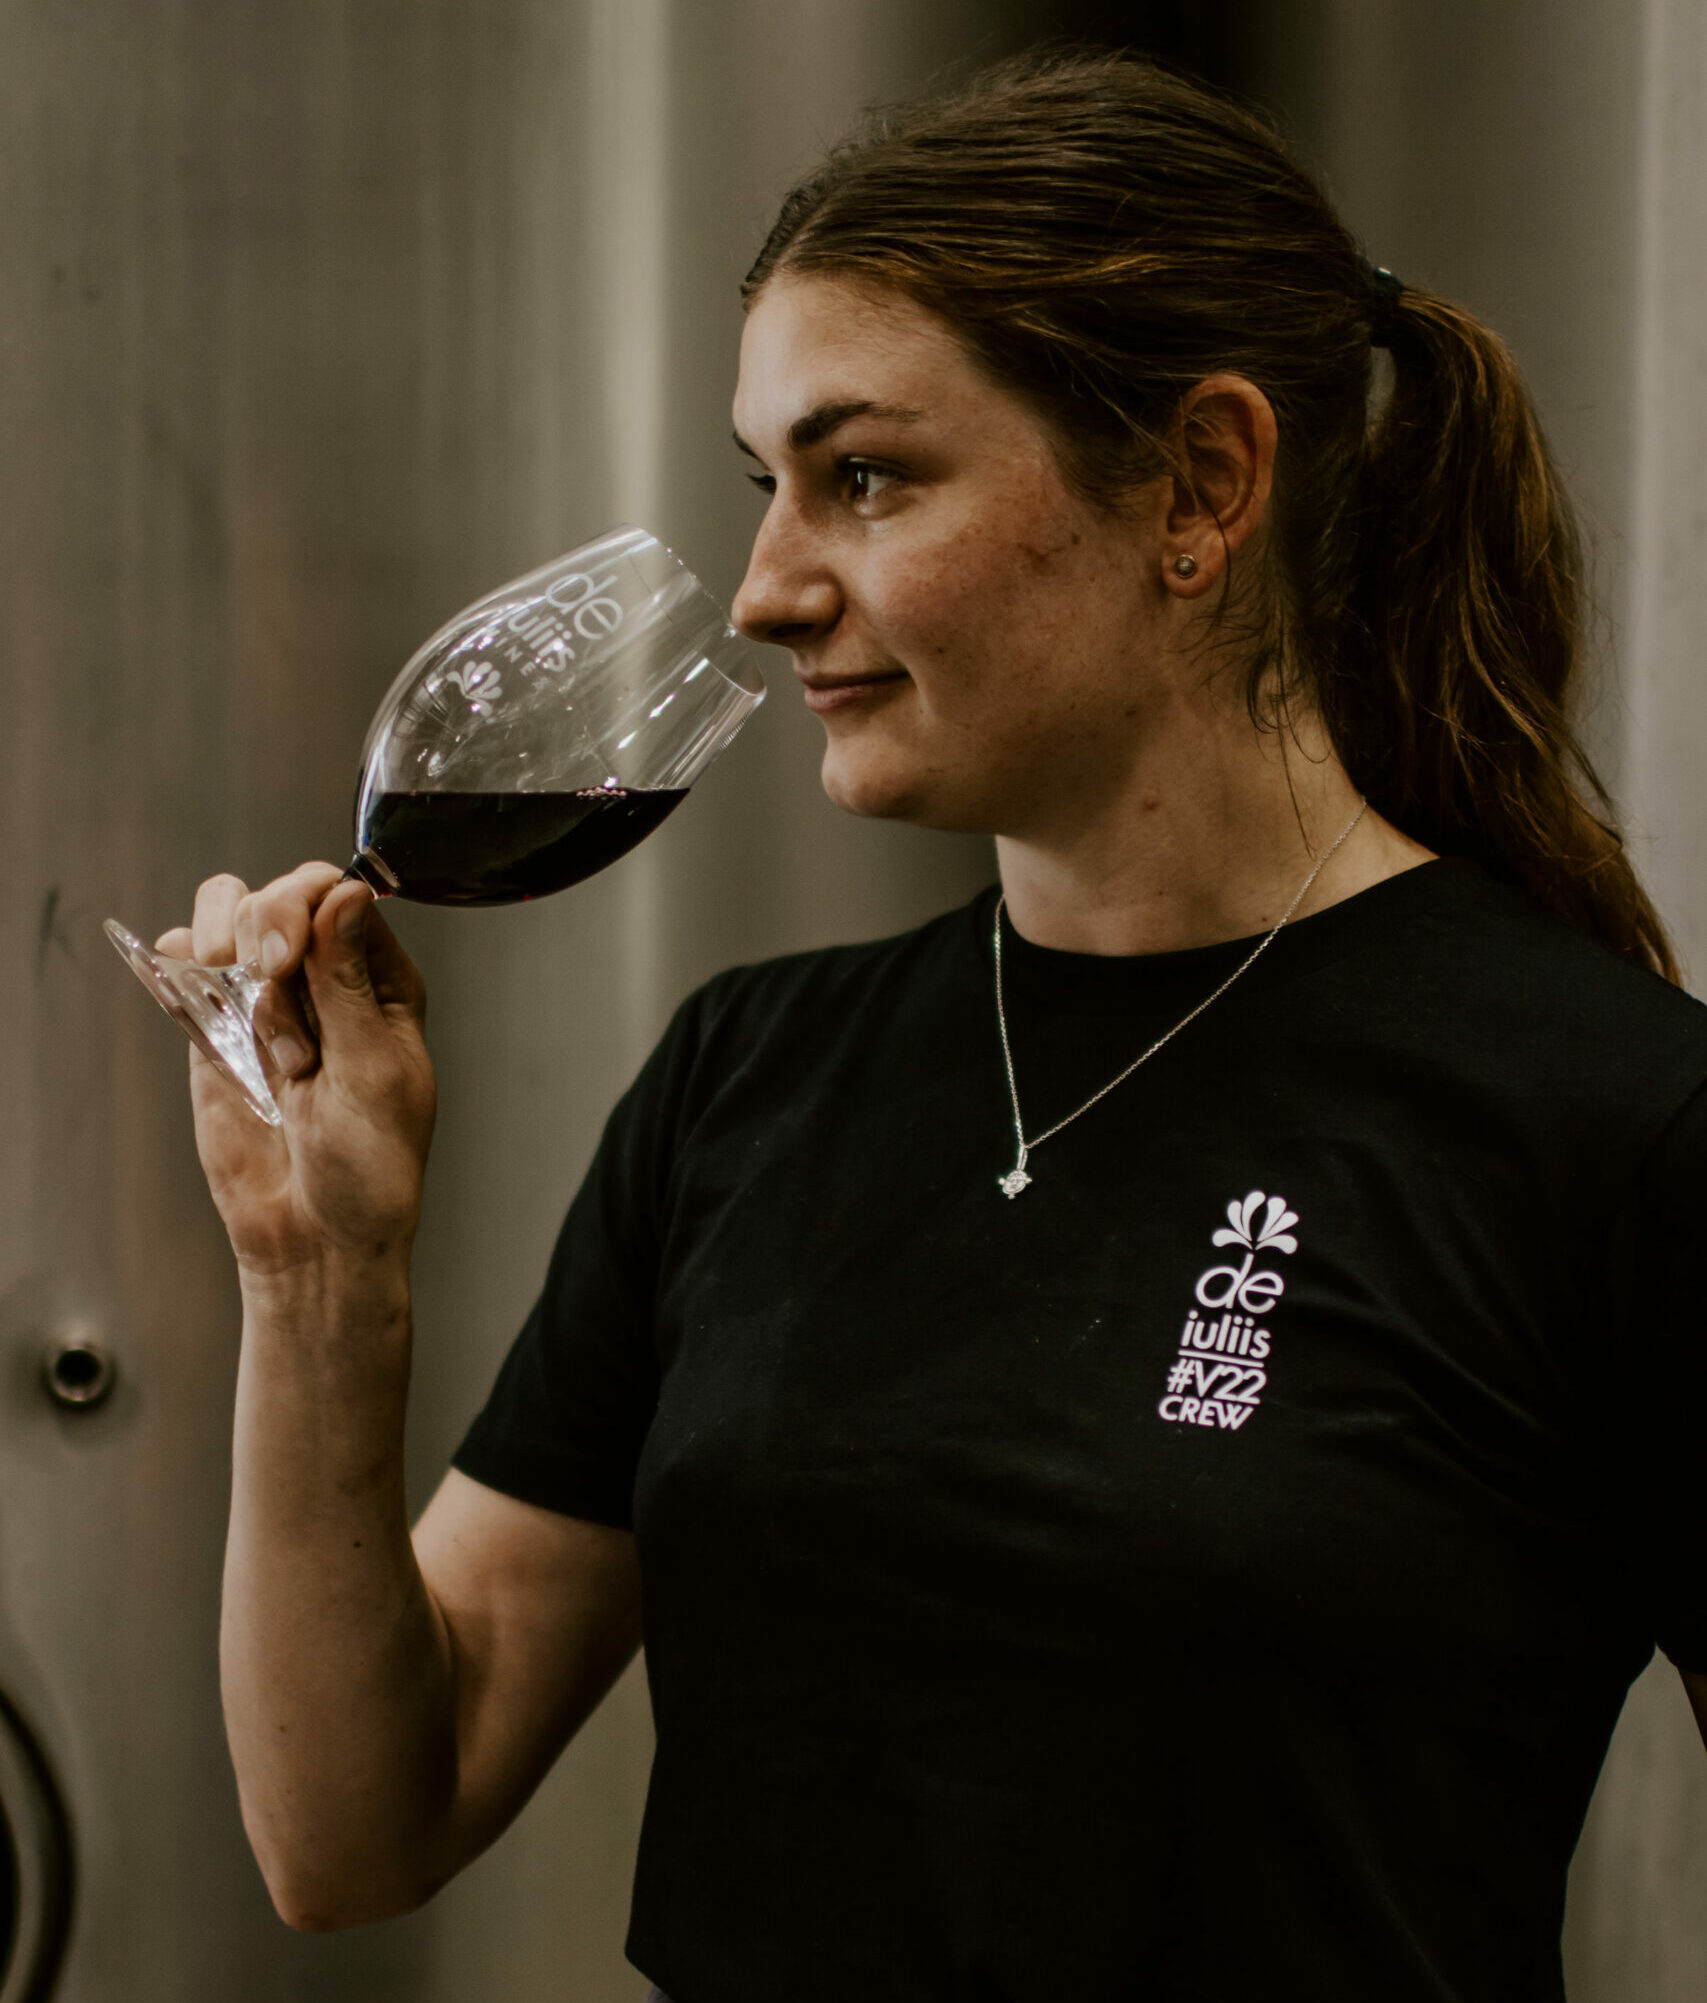 Meet our winemaker Emily Glover